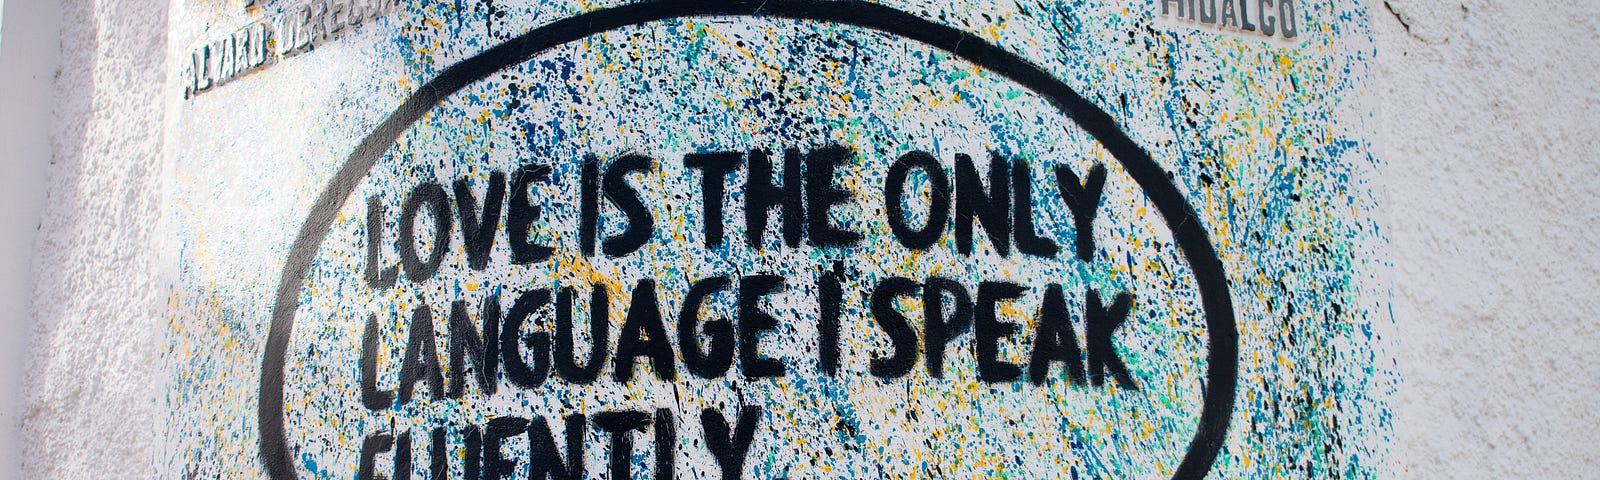 Graffiti on a wall showing a speach bobble saying “Love is the only language I speak fluently.”, signed by TrystyScribe